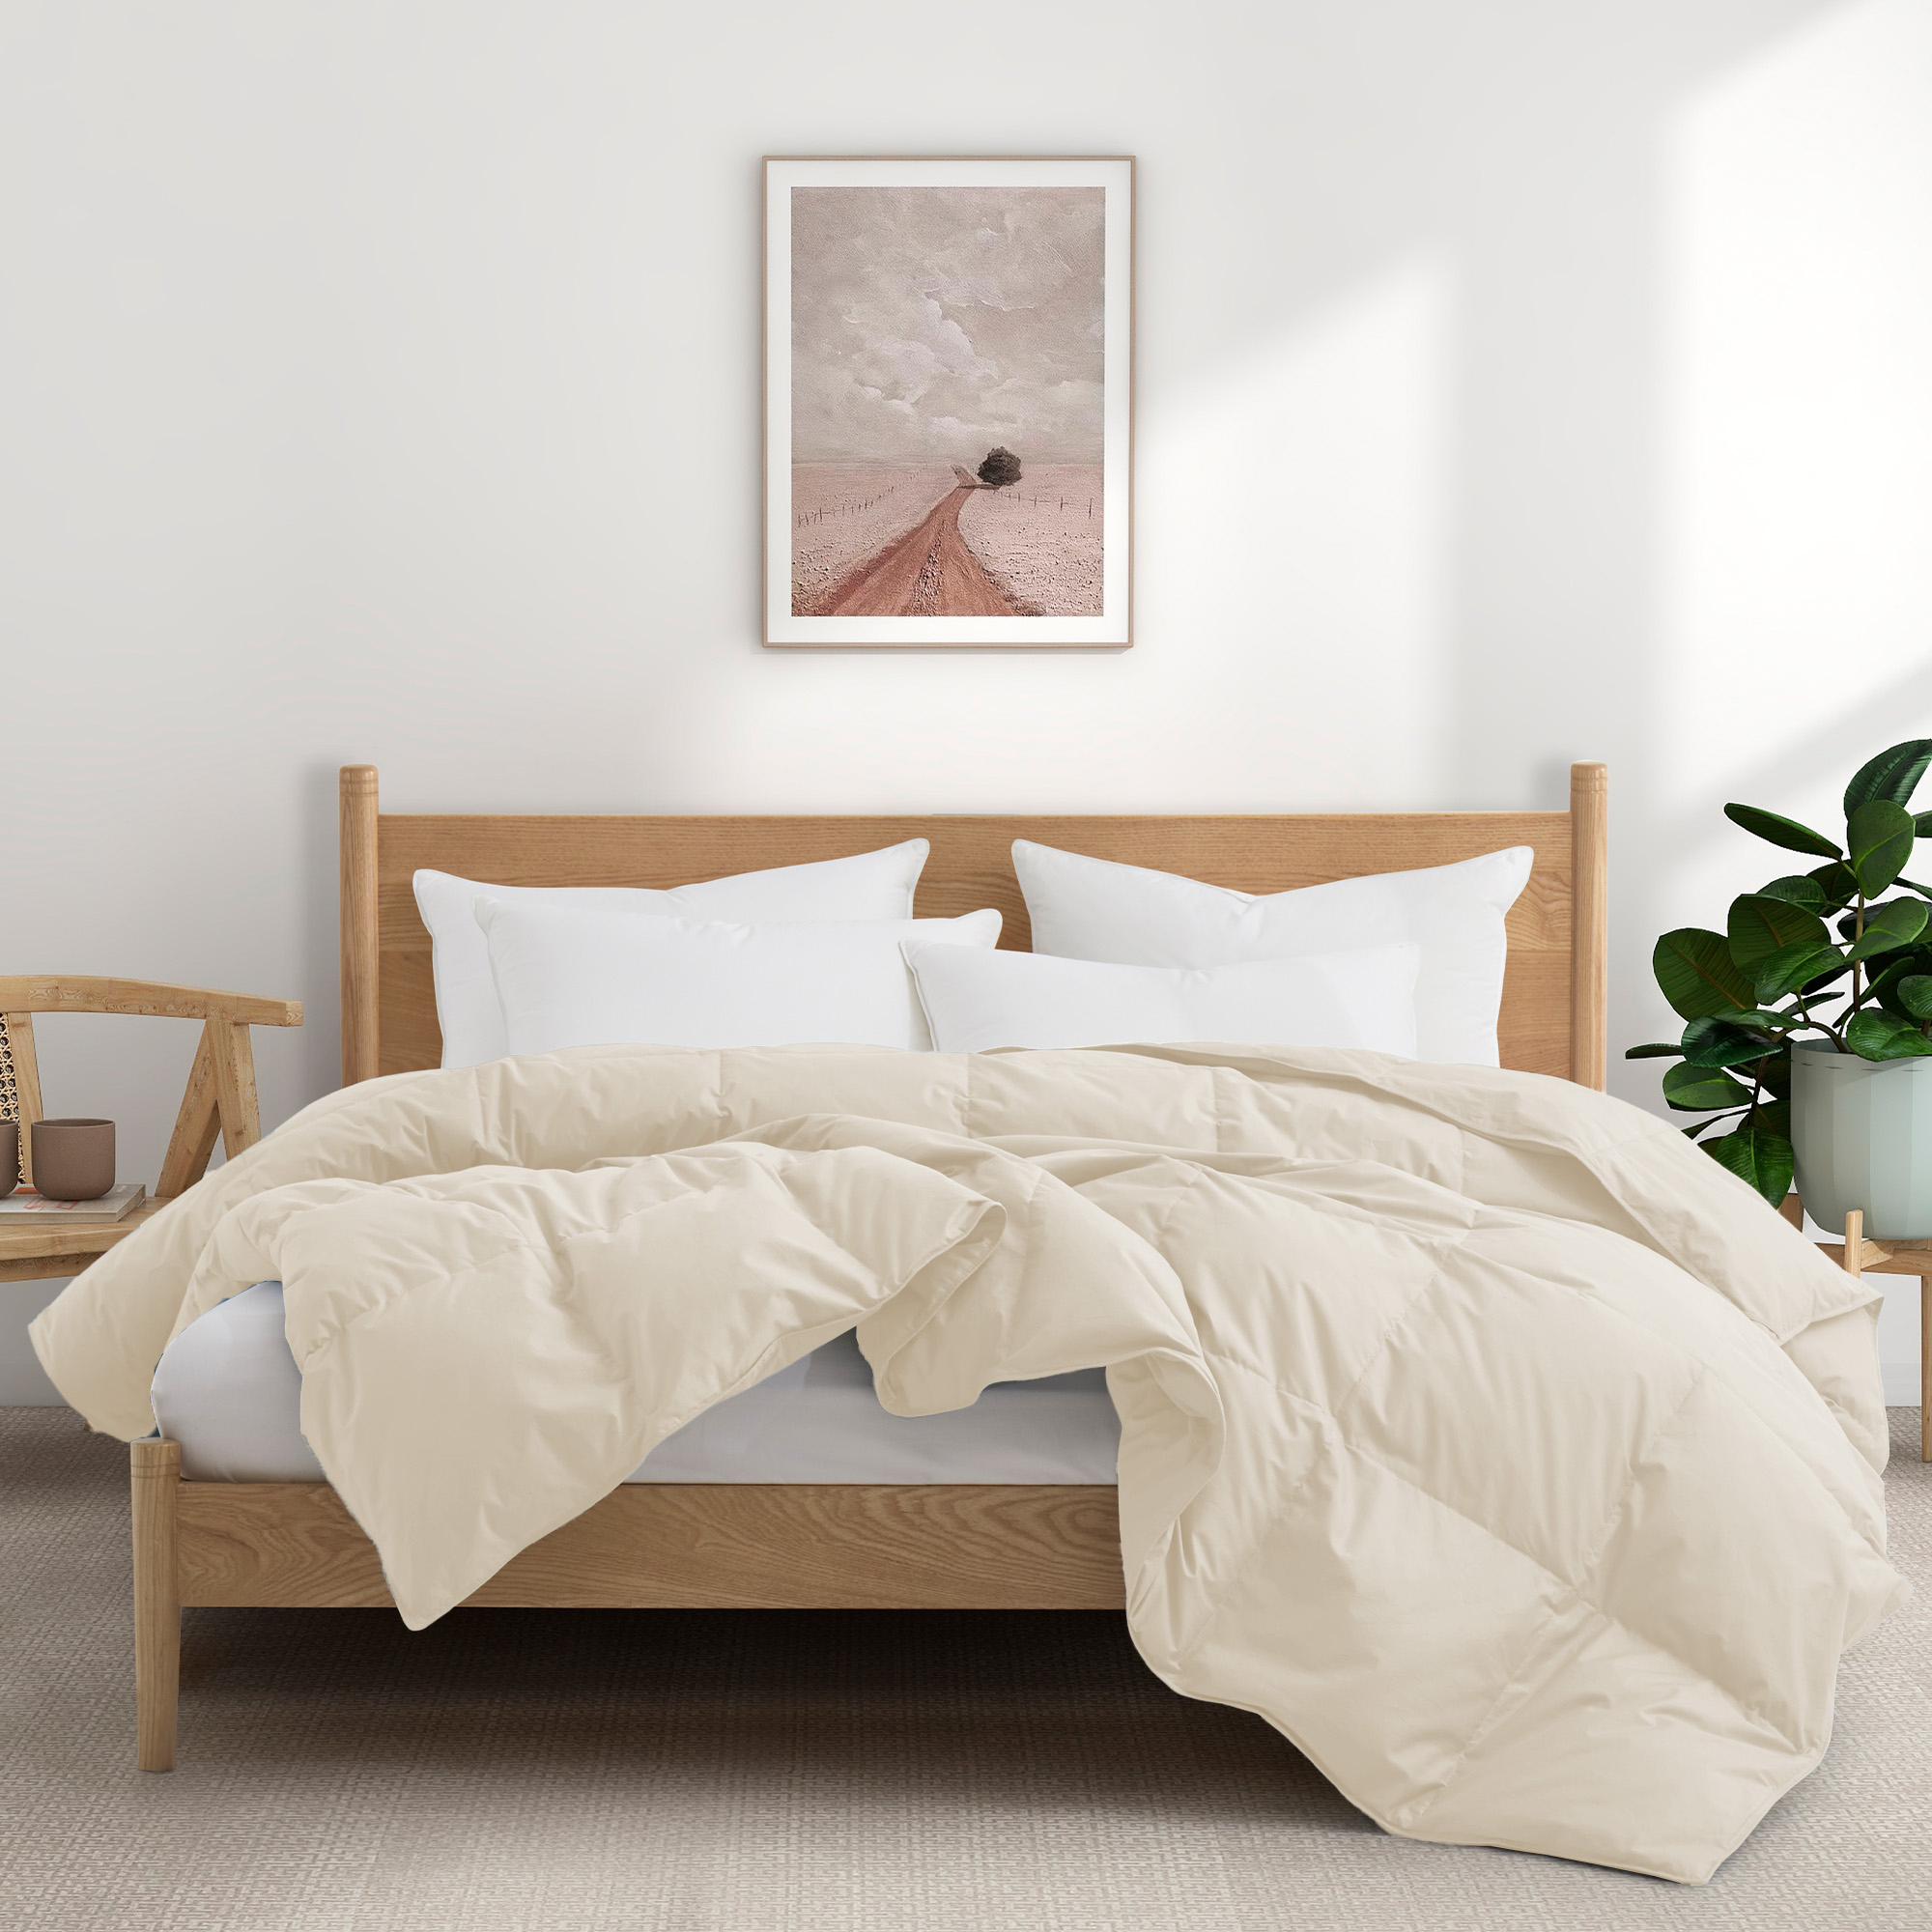 All Season Organic Cotton Comforter Filled With Down And Feather Fiber Twin Size - Off White